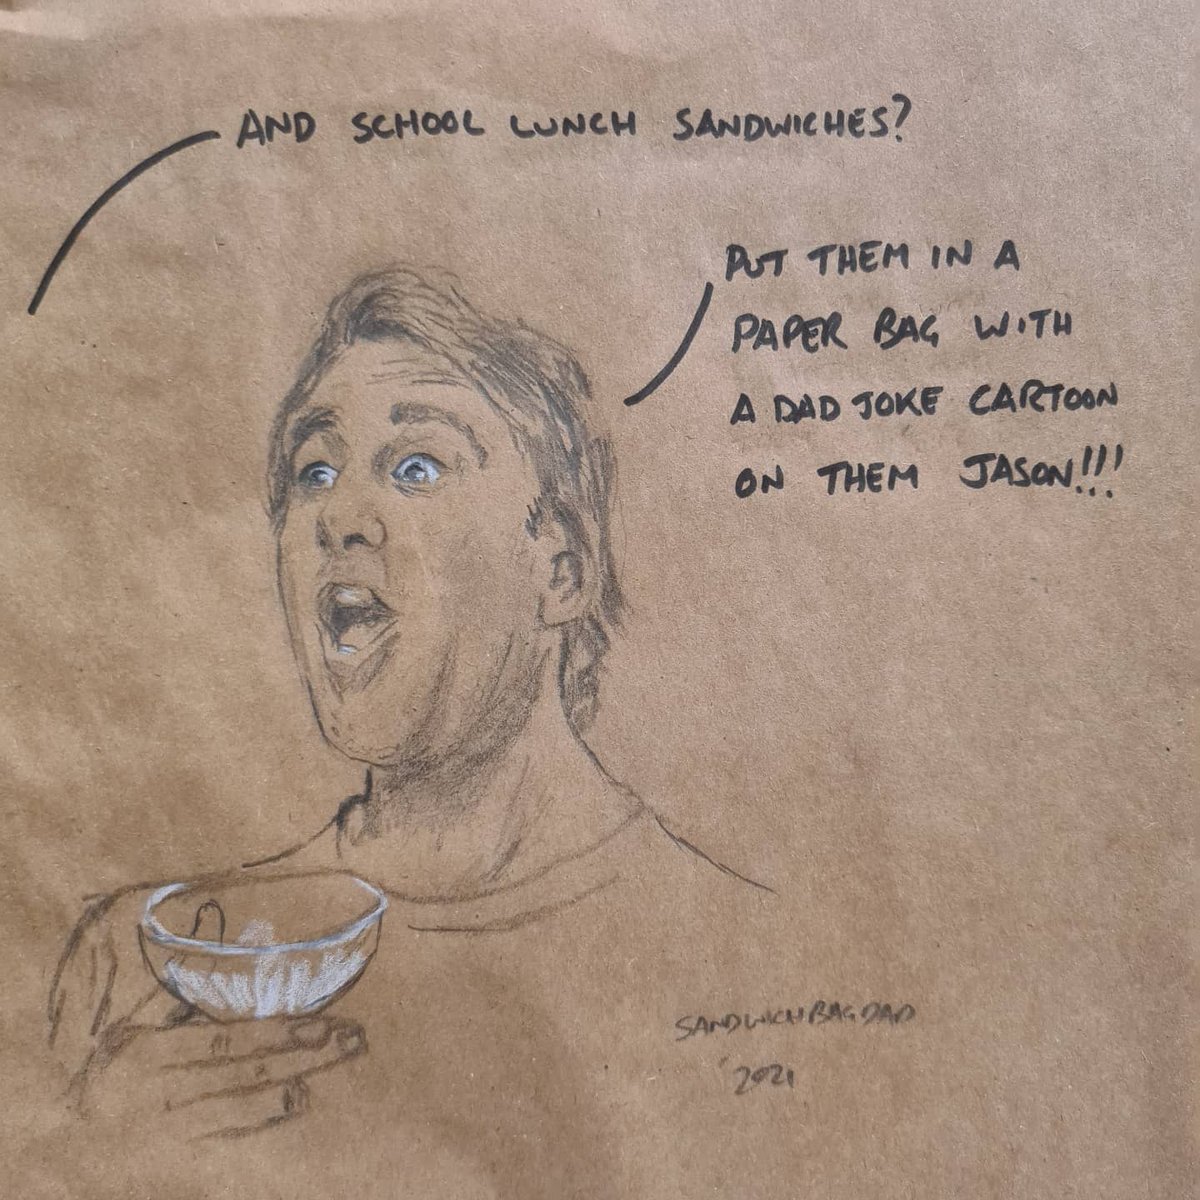 You'll need to be a Jimmy Rees fan to understand today's sandwichbag portrait. (If you're not following him, where have you been Jason???). His packaging guy videos are hilarious! Thanks for the #giggles Jimmy
.
#jimmyrees
#jasonjasonjason  #theguywhodecidespackaging #jimmygiggle